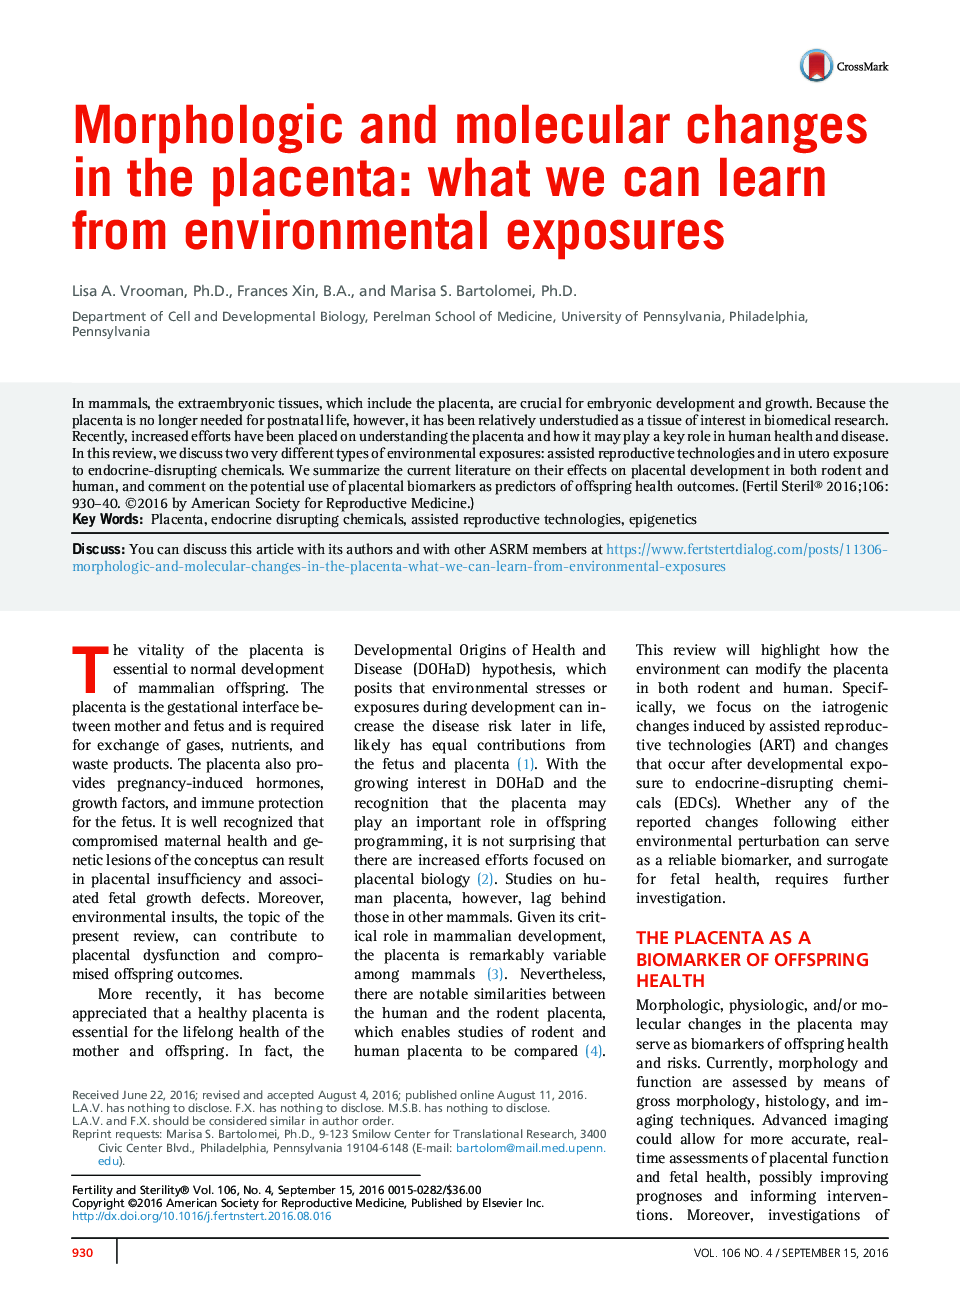 Morphologic and molecular changes in the placenta: what we can learn from environmental exposures 